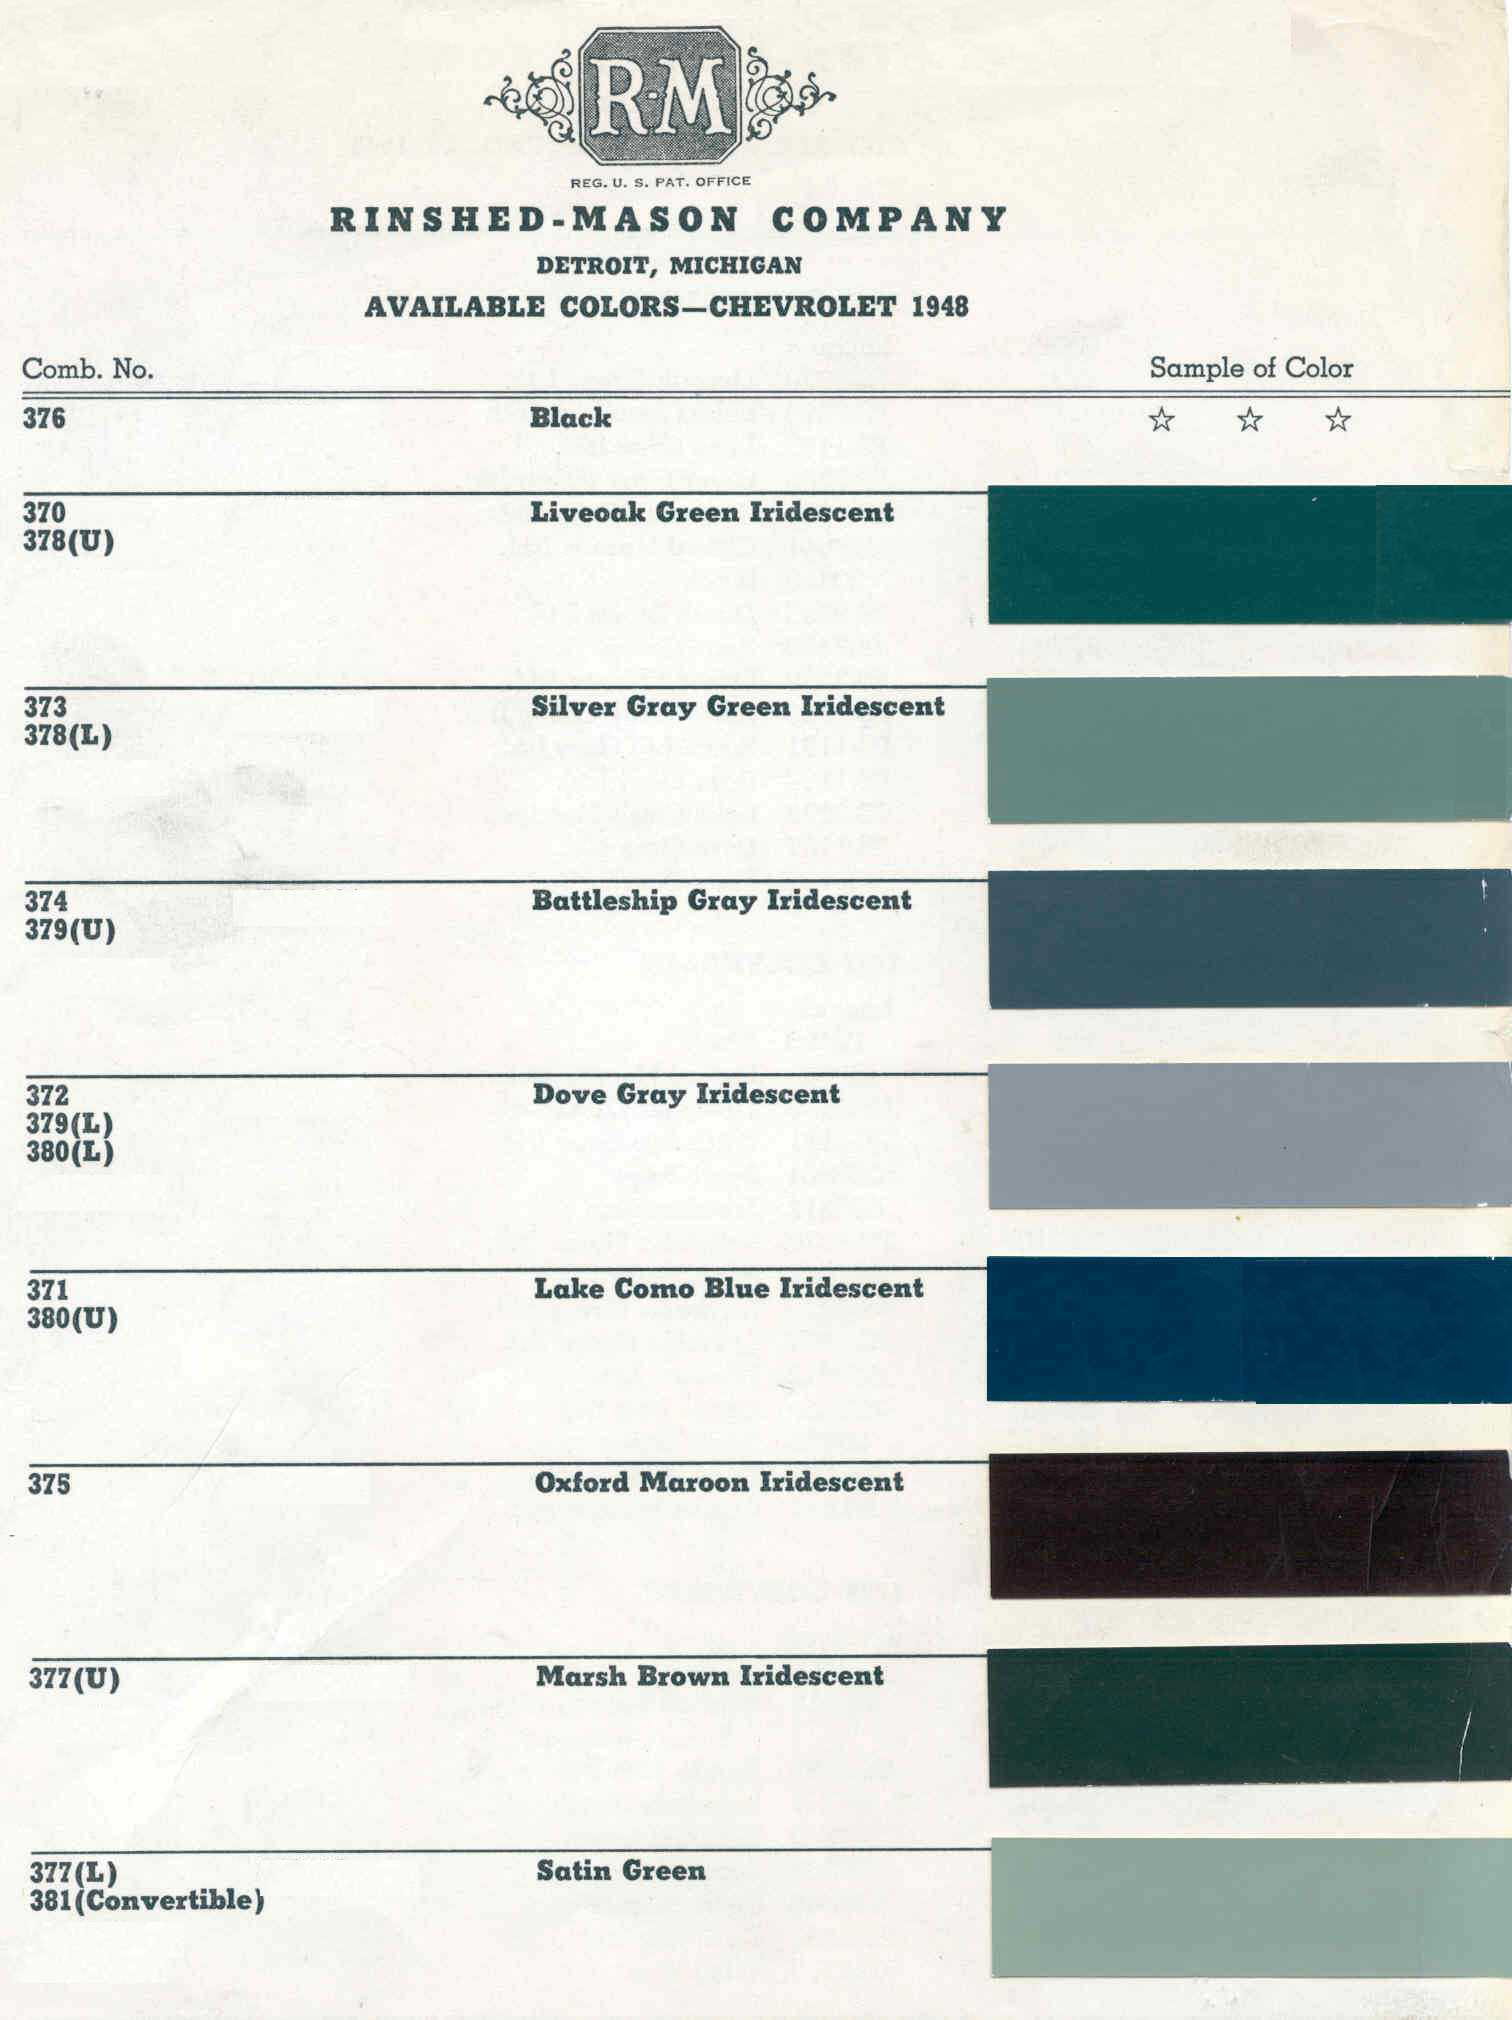 Color Examples and their codes for Chevrolet Vehicles